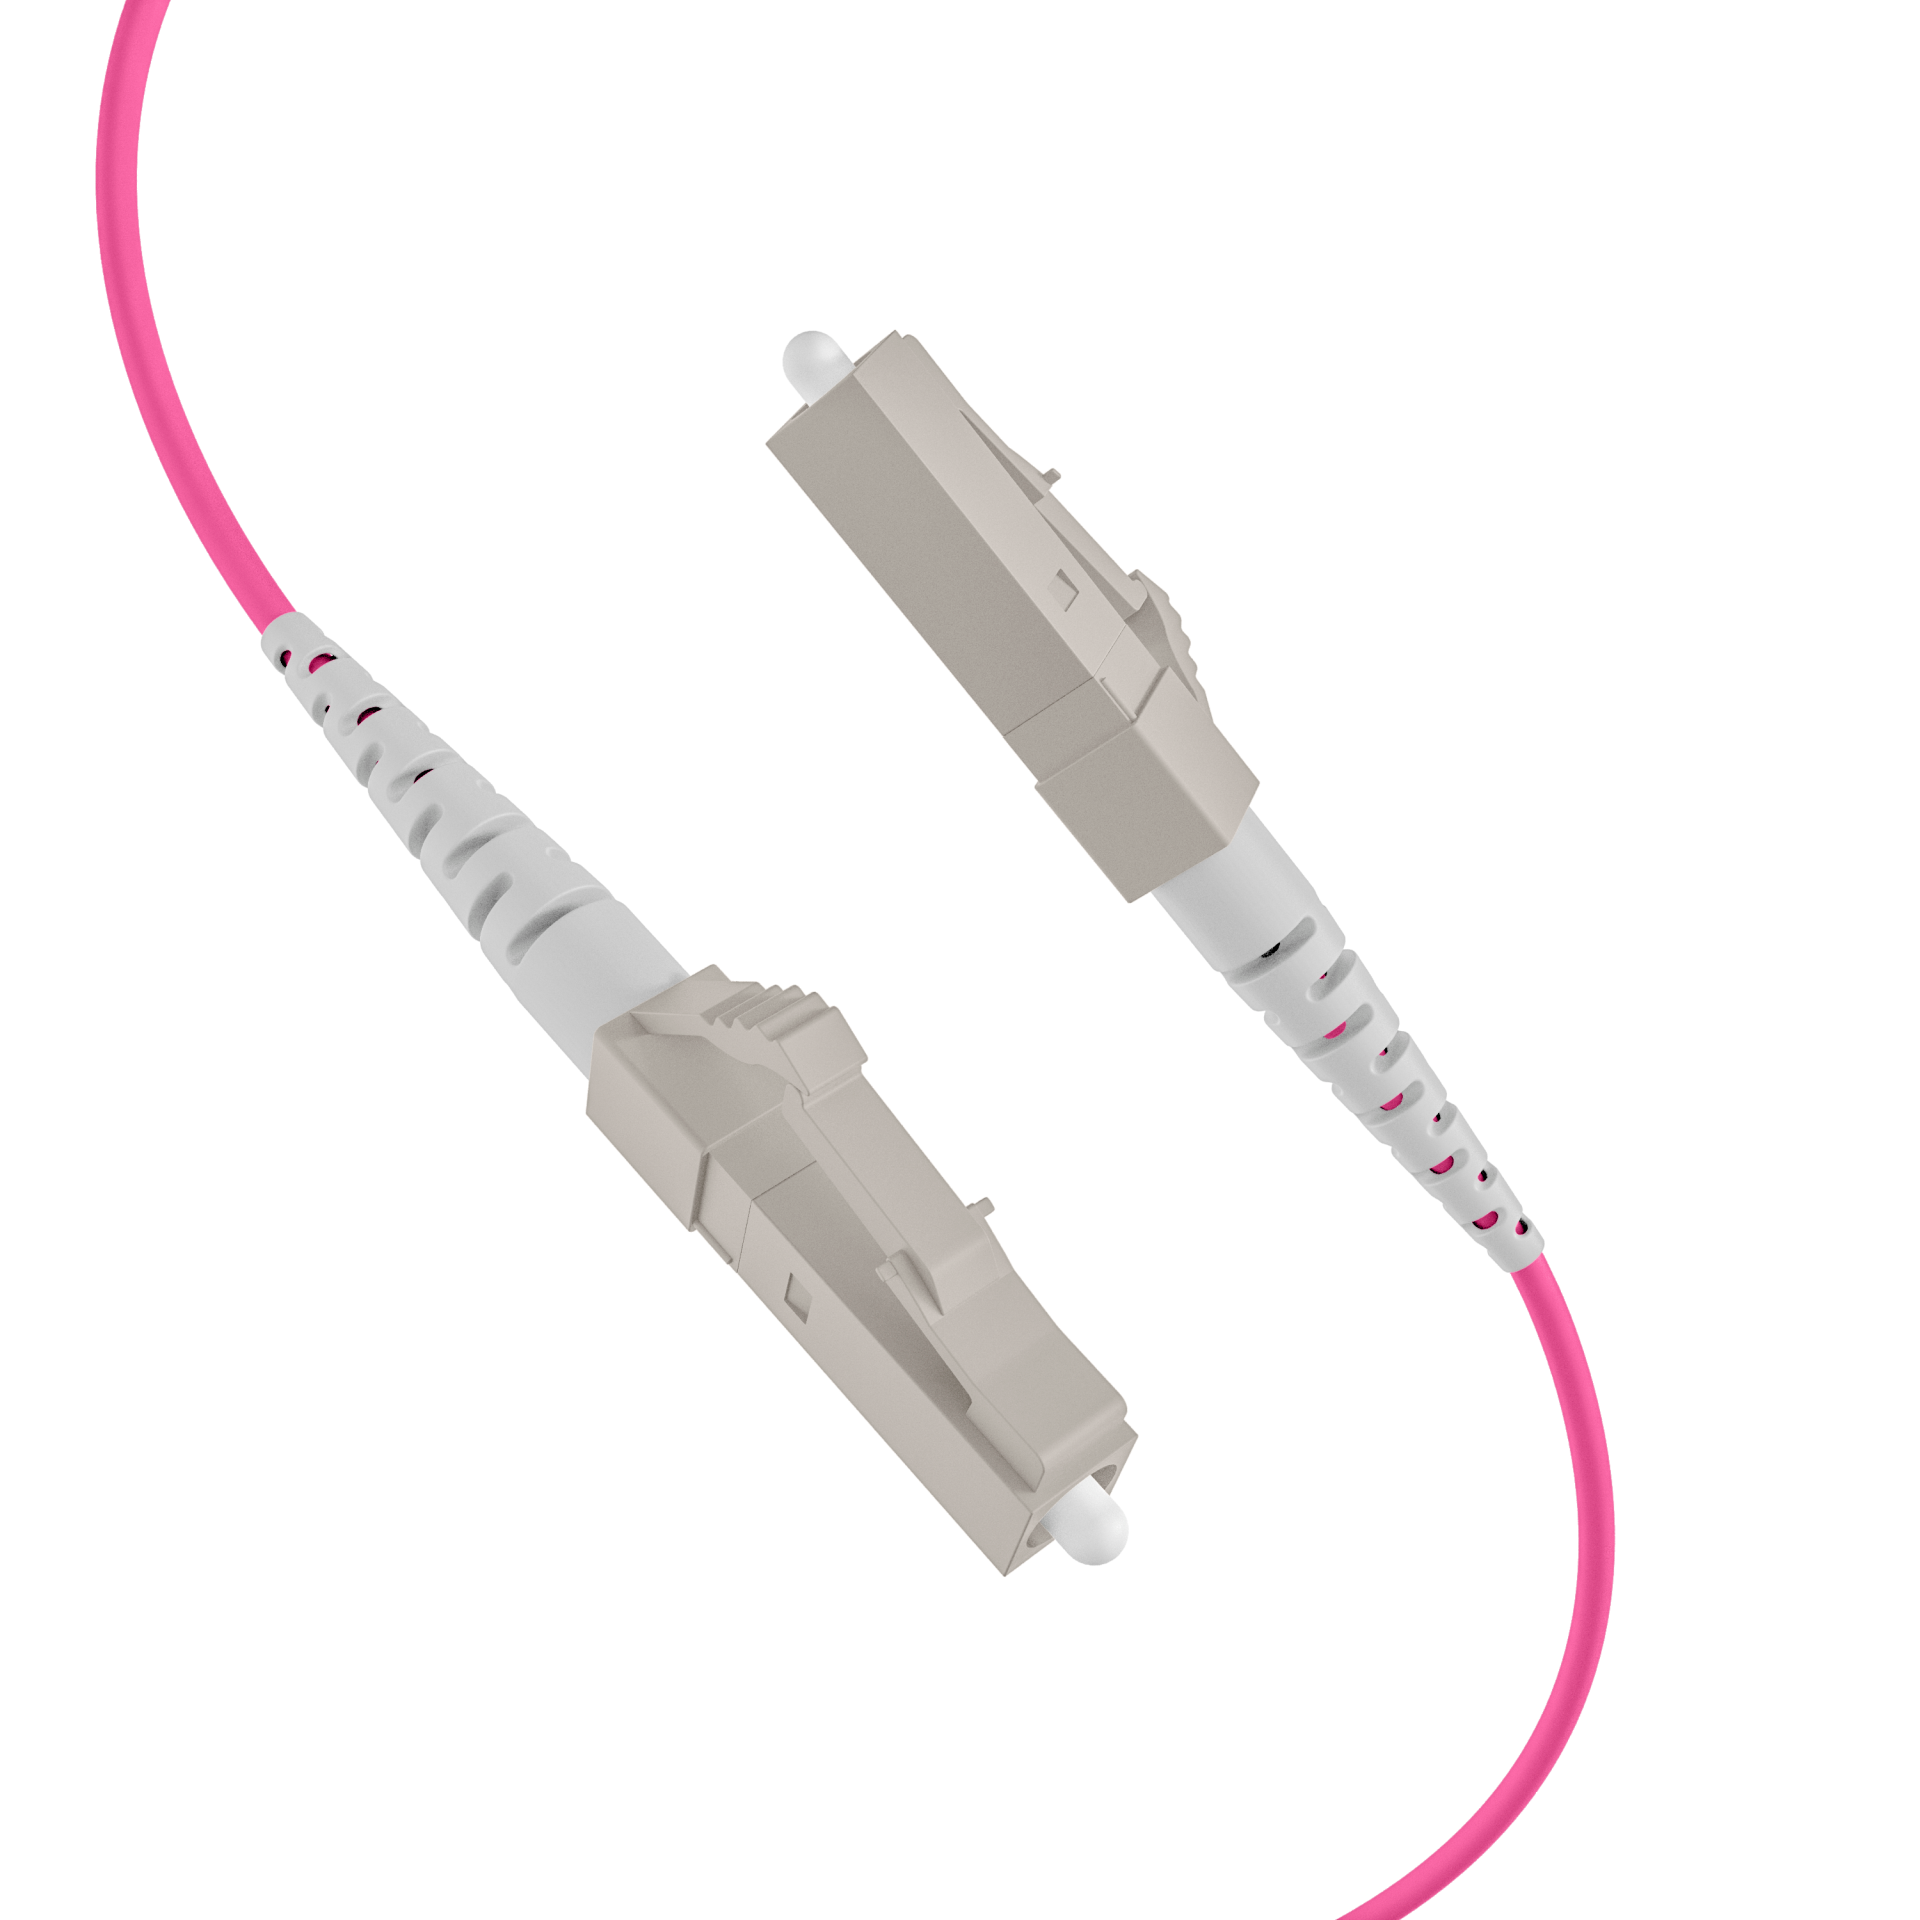 Trunkcable U-DQ(ZN)BH OM4 8G (1x8) LC-LC,170m Dca LSZH